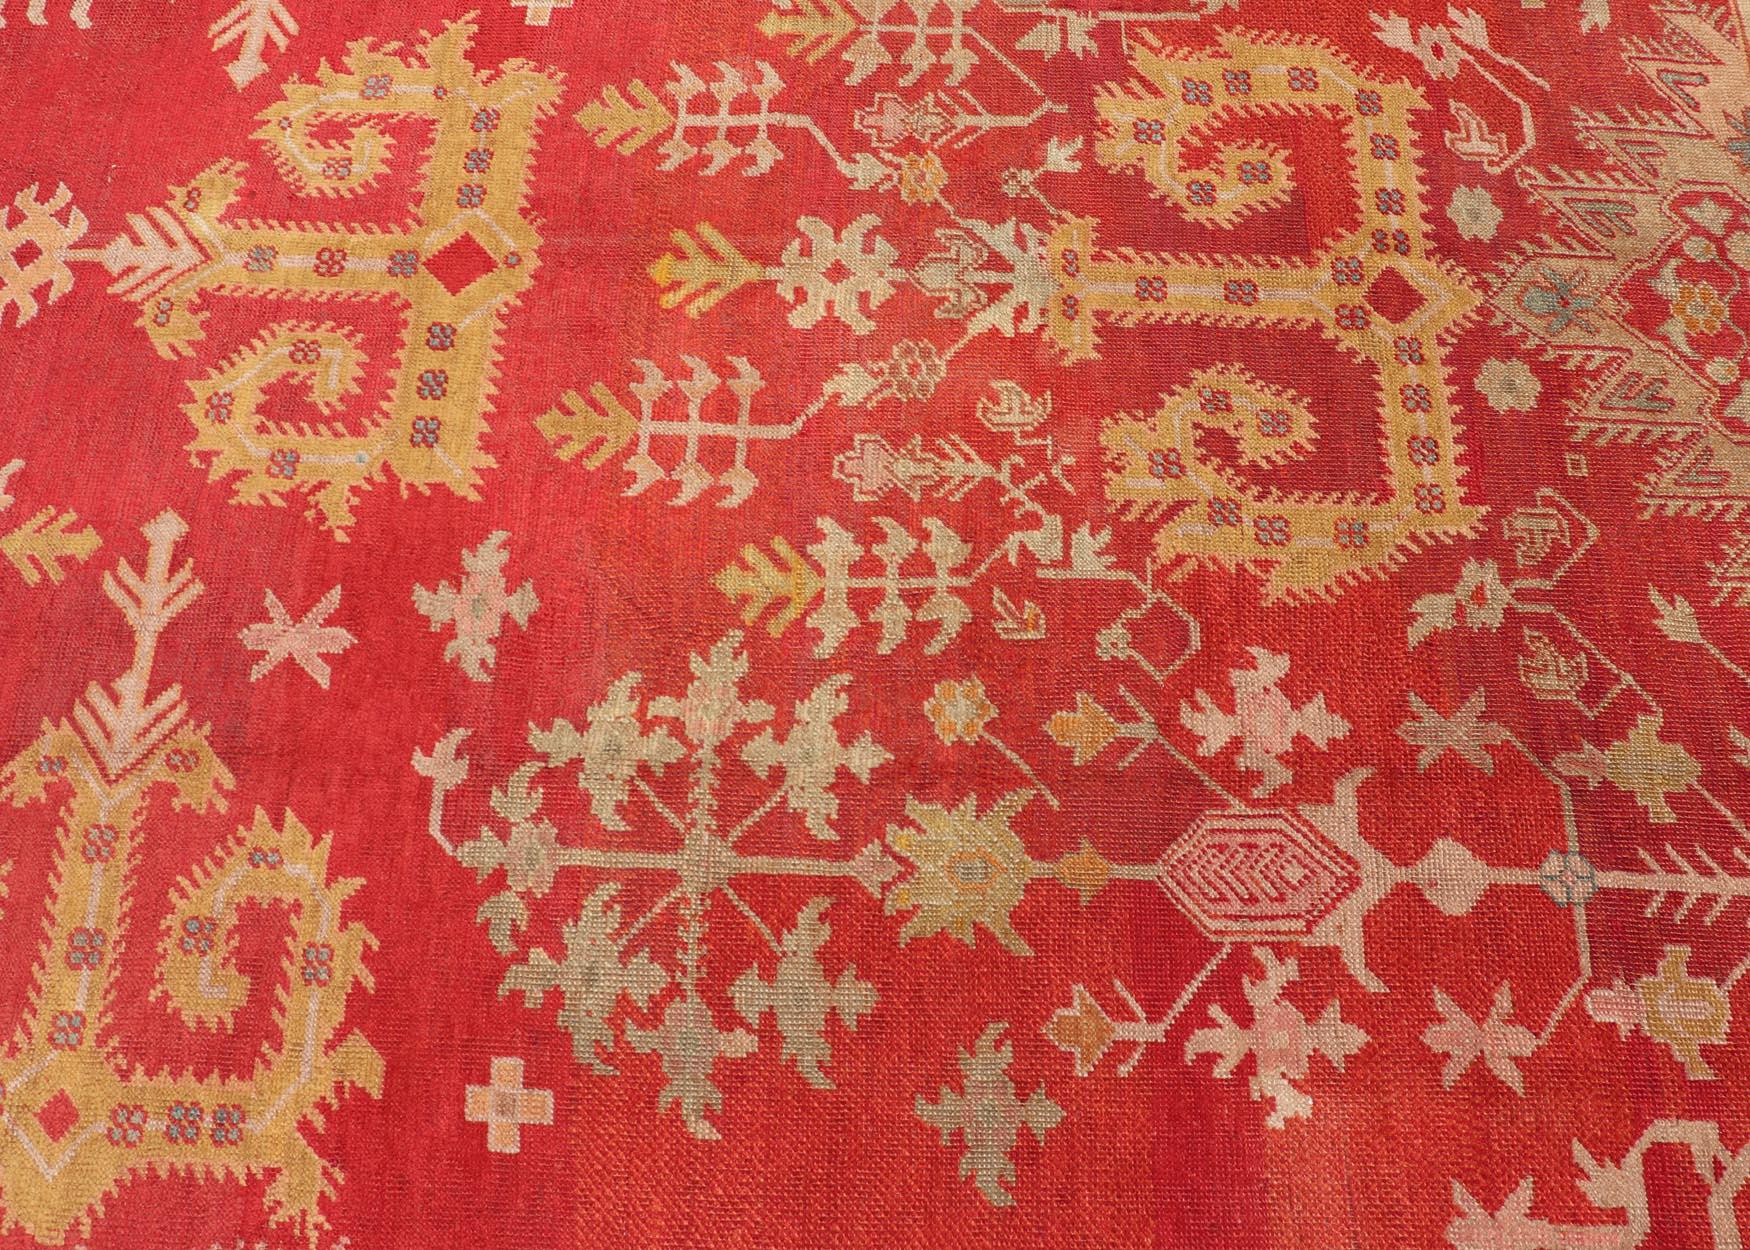 Wool Antique Turkish Oushak Rug in Royal Red and Saffron Gold with Geometric Design For Sale